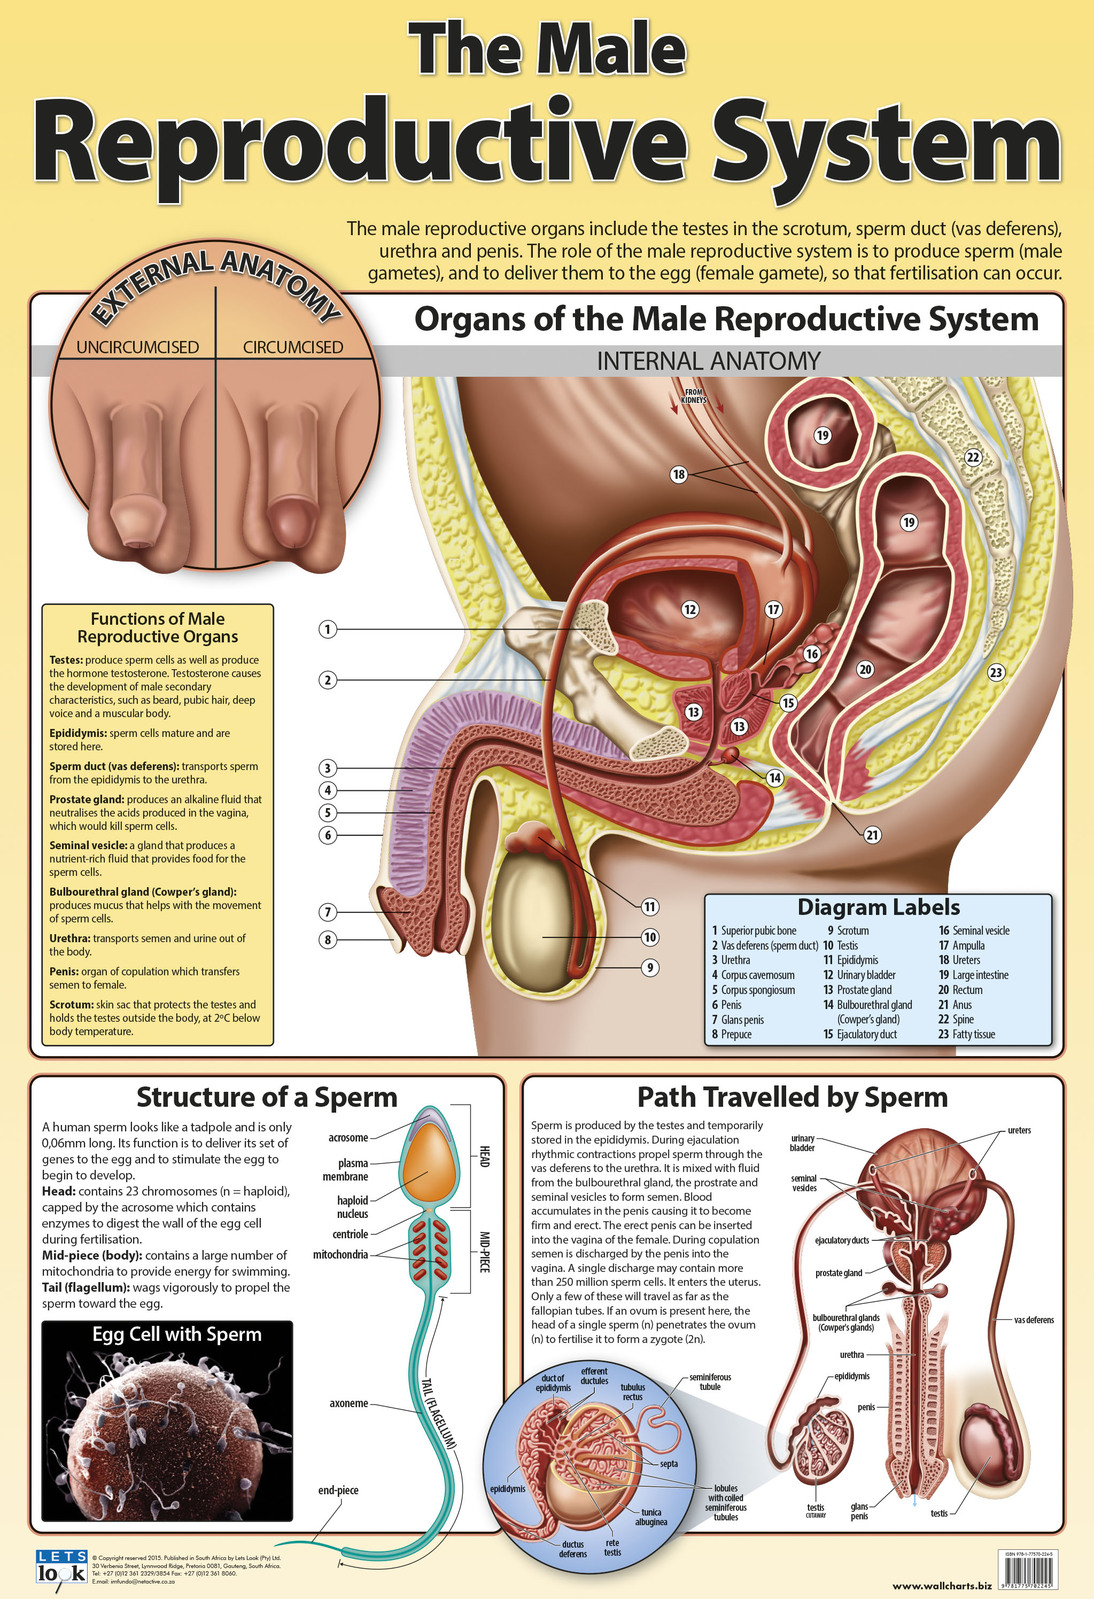 The Male Reproductive System - Lets Look